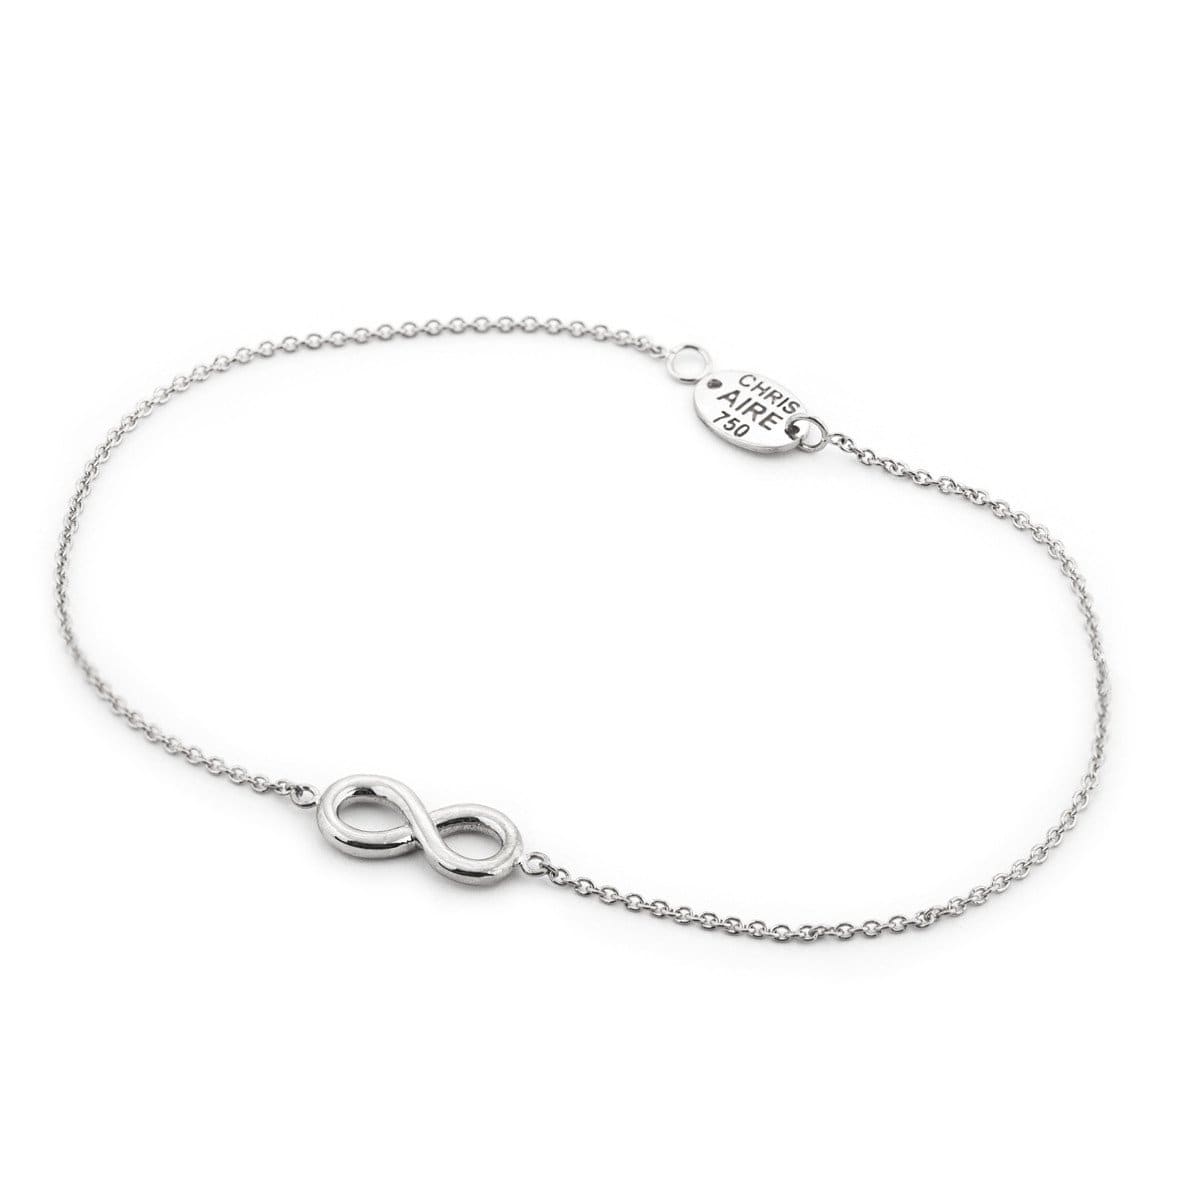 WHITE GOLD INFINITY BRACELET - Chris Aire Fine Jewelry & Timepieces